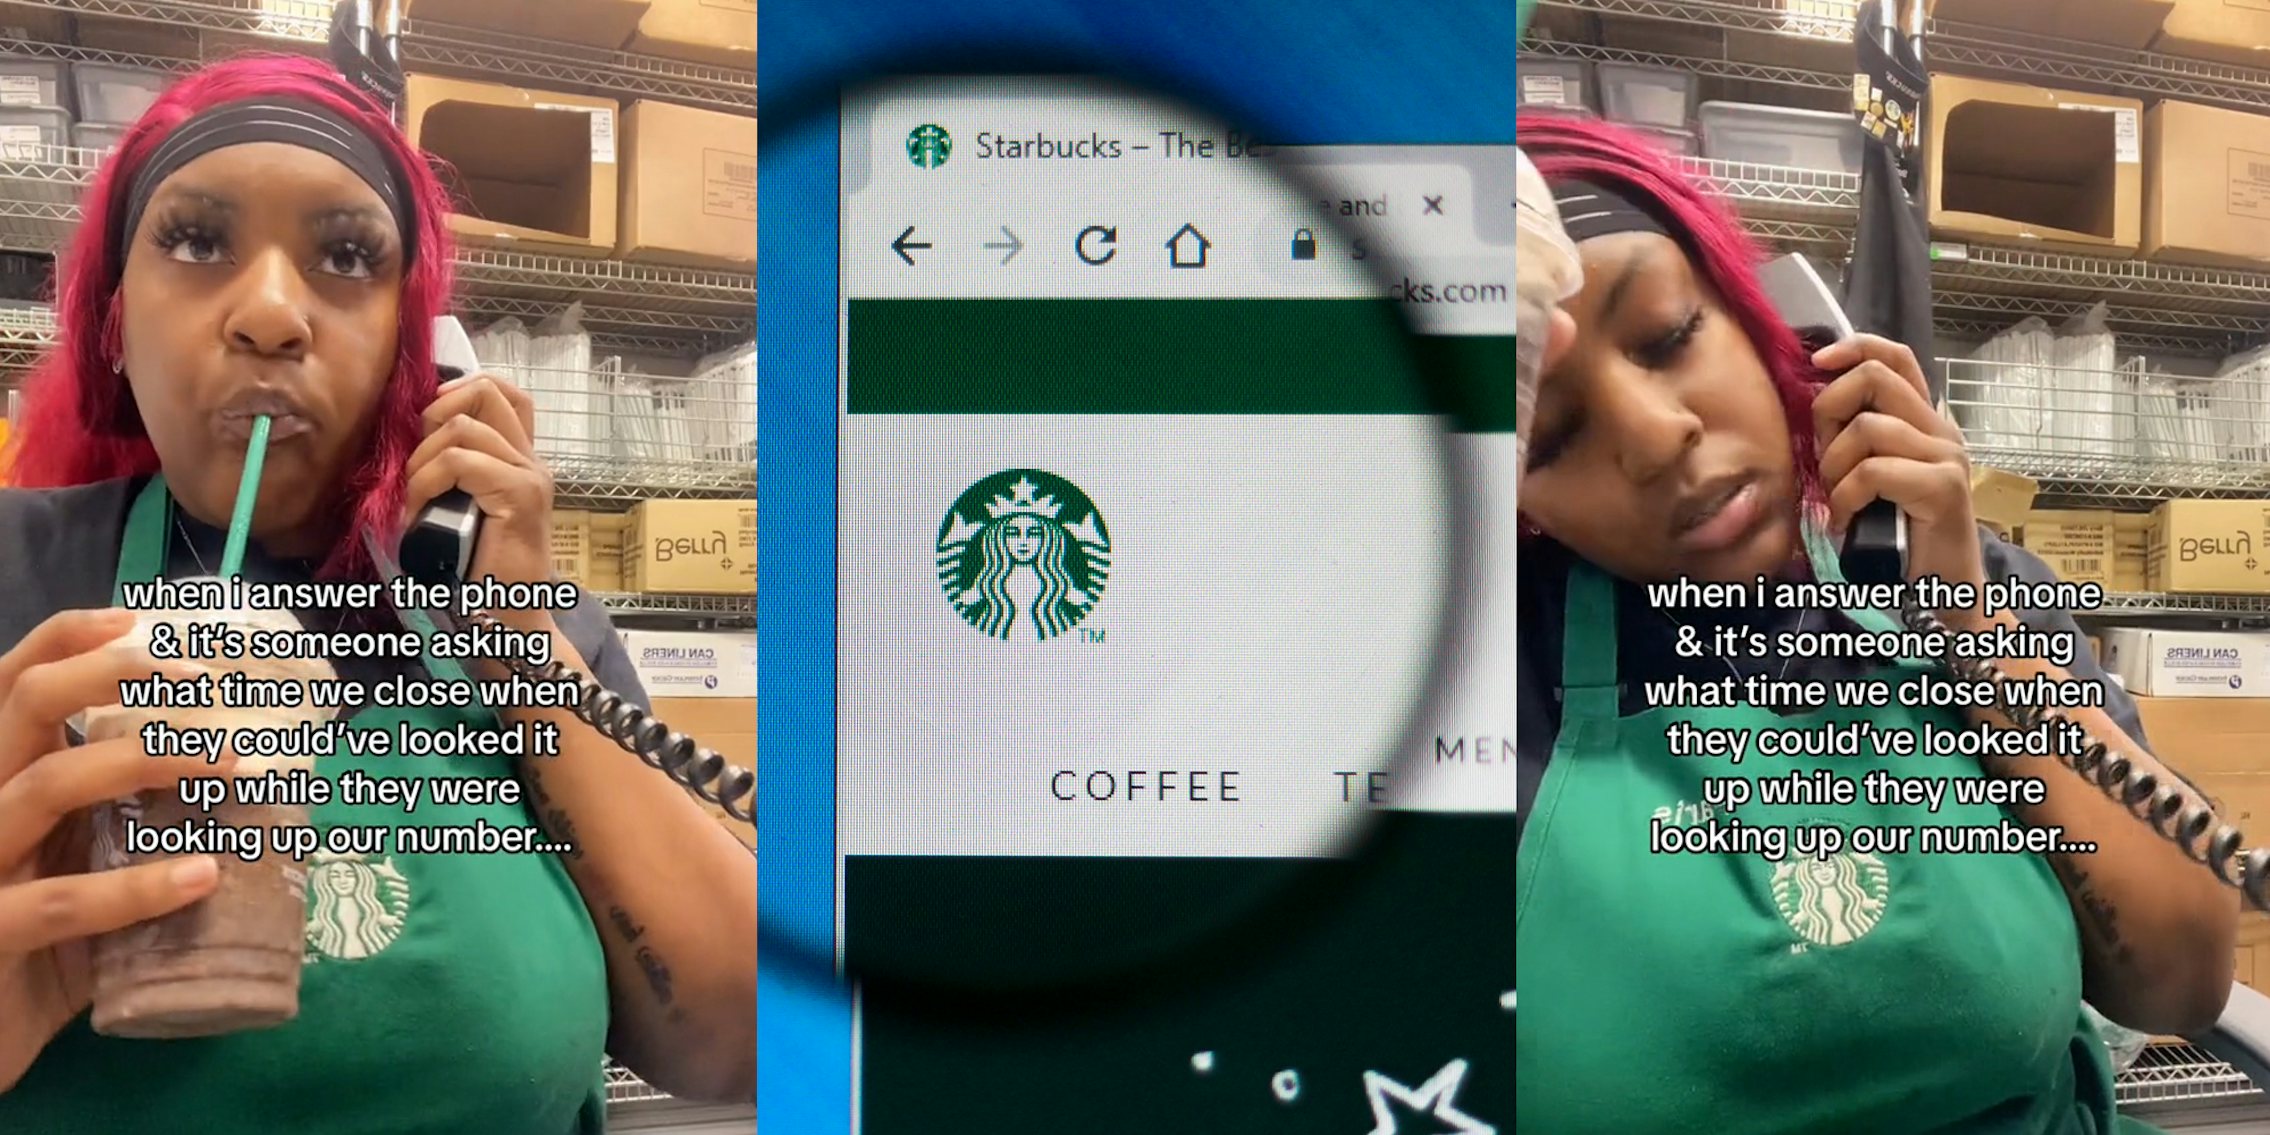 Starbucks worker on phone with caption 'when i answer the phone & it's someone asking what time we close when they could've looked it up while they were looking up our number...' (l) Starbucks website in search bar on laptop screen with magnifying glass circling Starbucks logo (c) Starbucks worker on phone with caption 'when i answer the phone & it's someone asking what time we close when they could've looked it up while they were looking up our number...' (r)